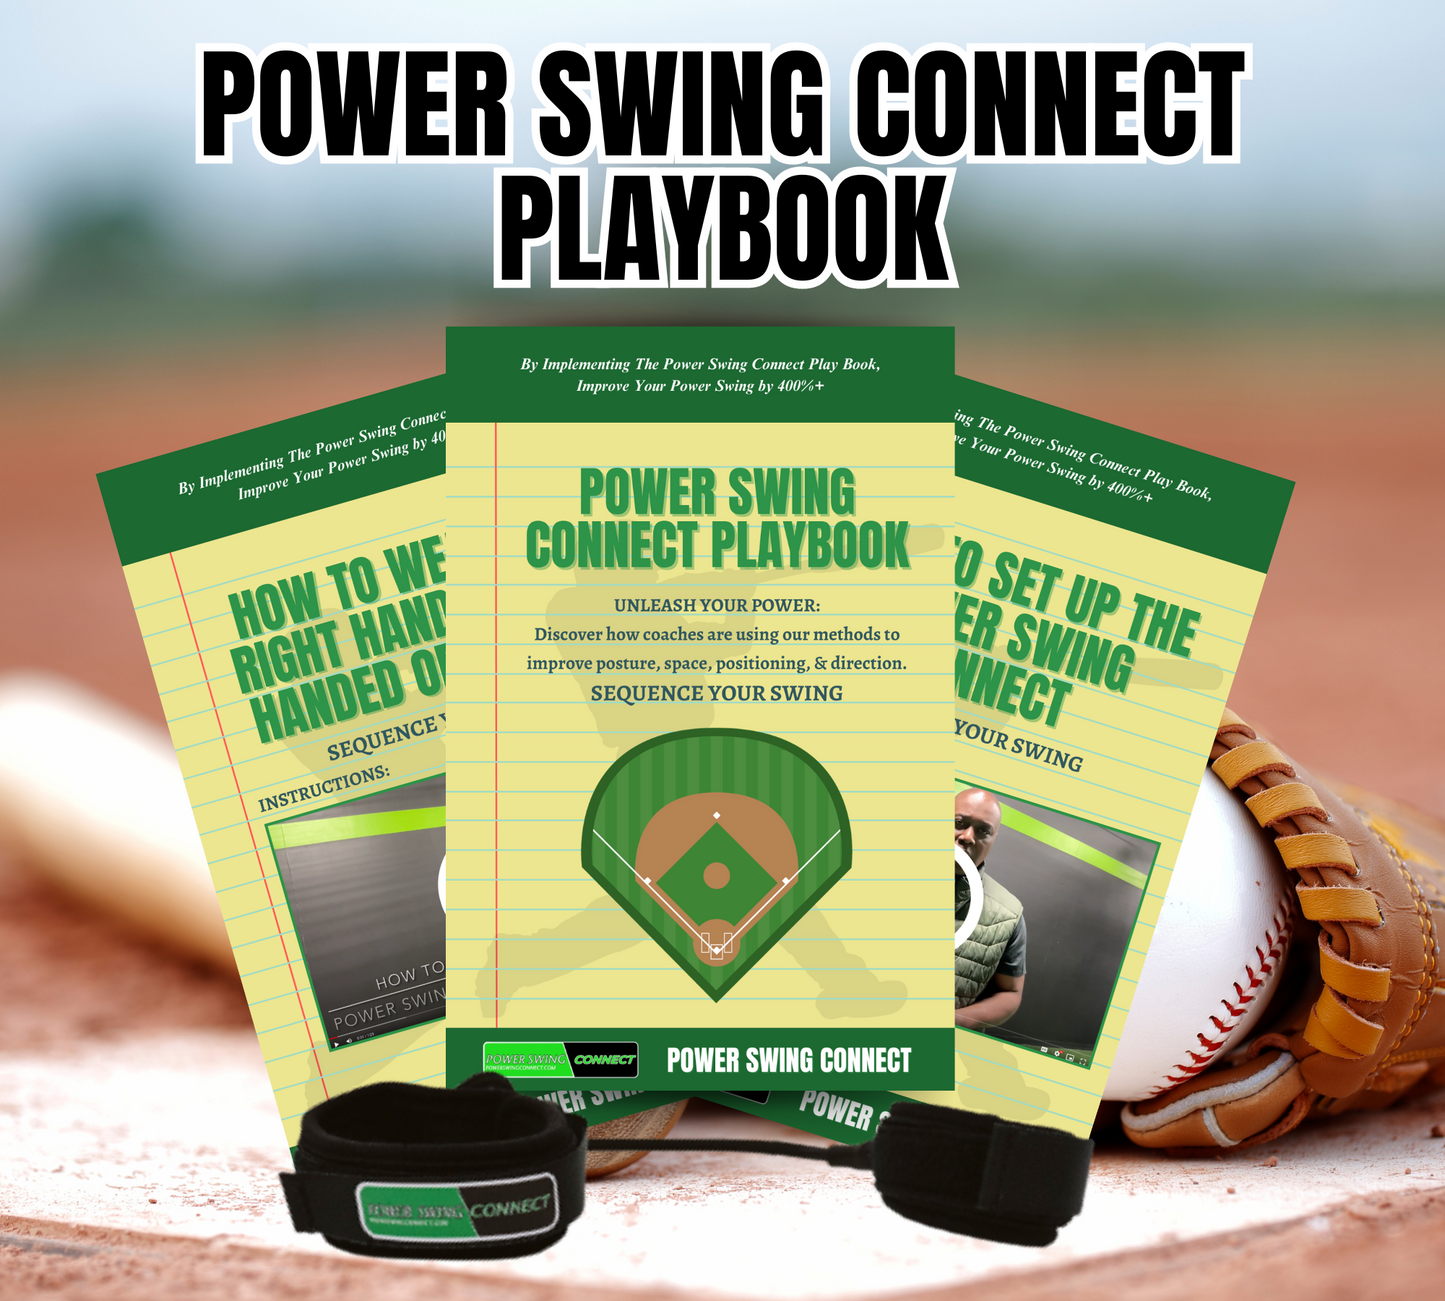 POWER SWING CONNECT + Playbook (4 Pack) (4 Slim)